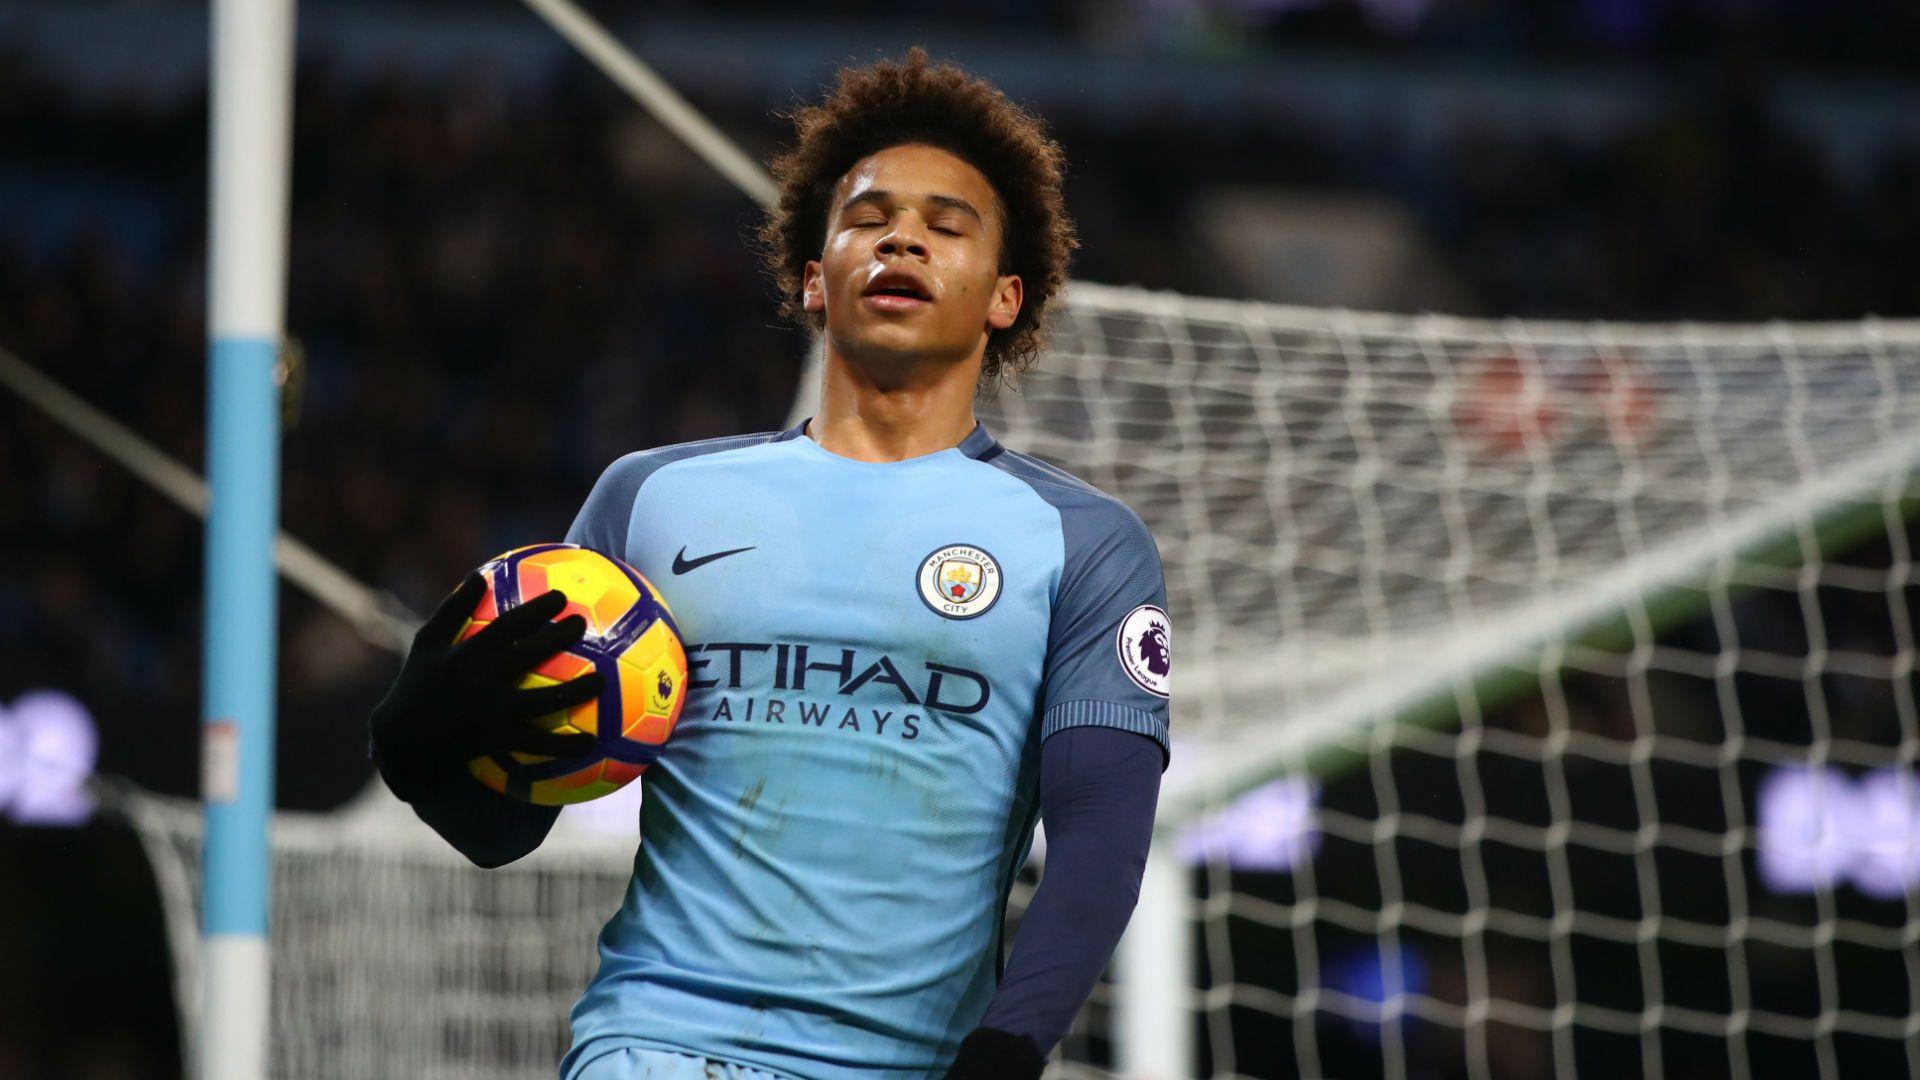 Leroy Sane can be a star for Man City & Germany'